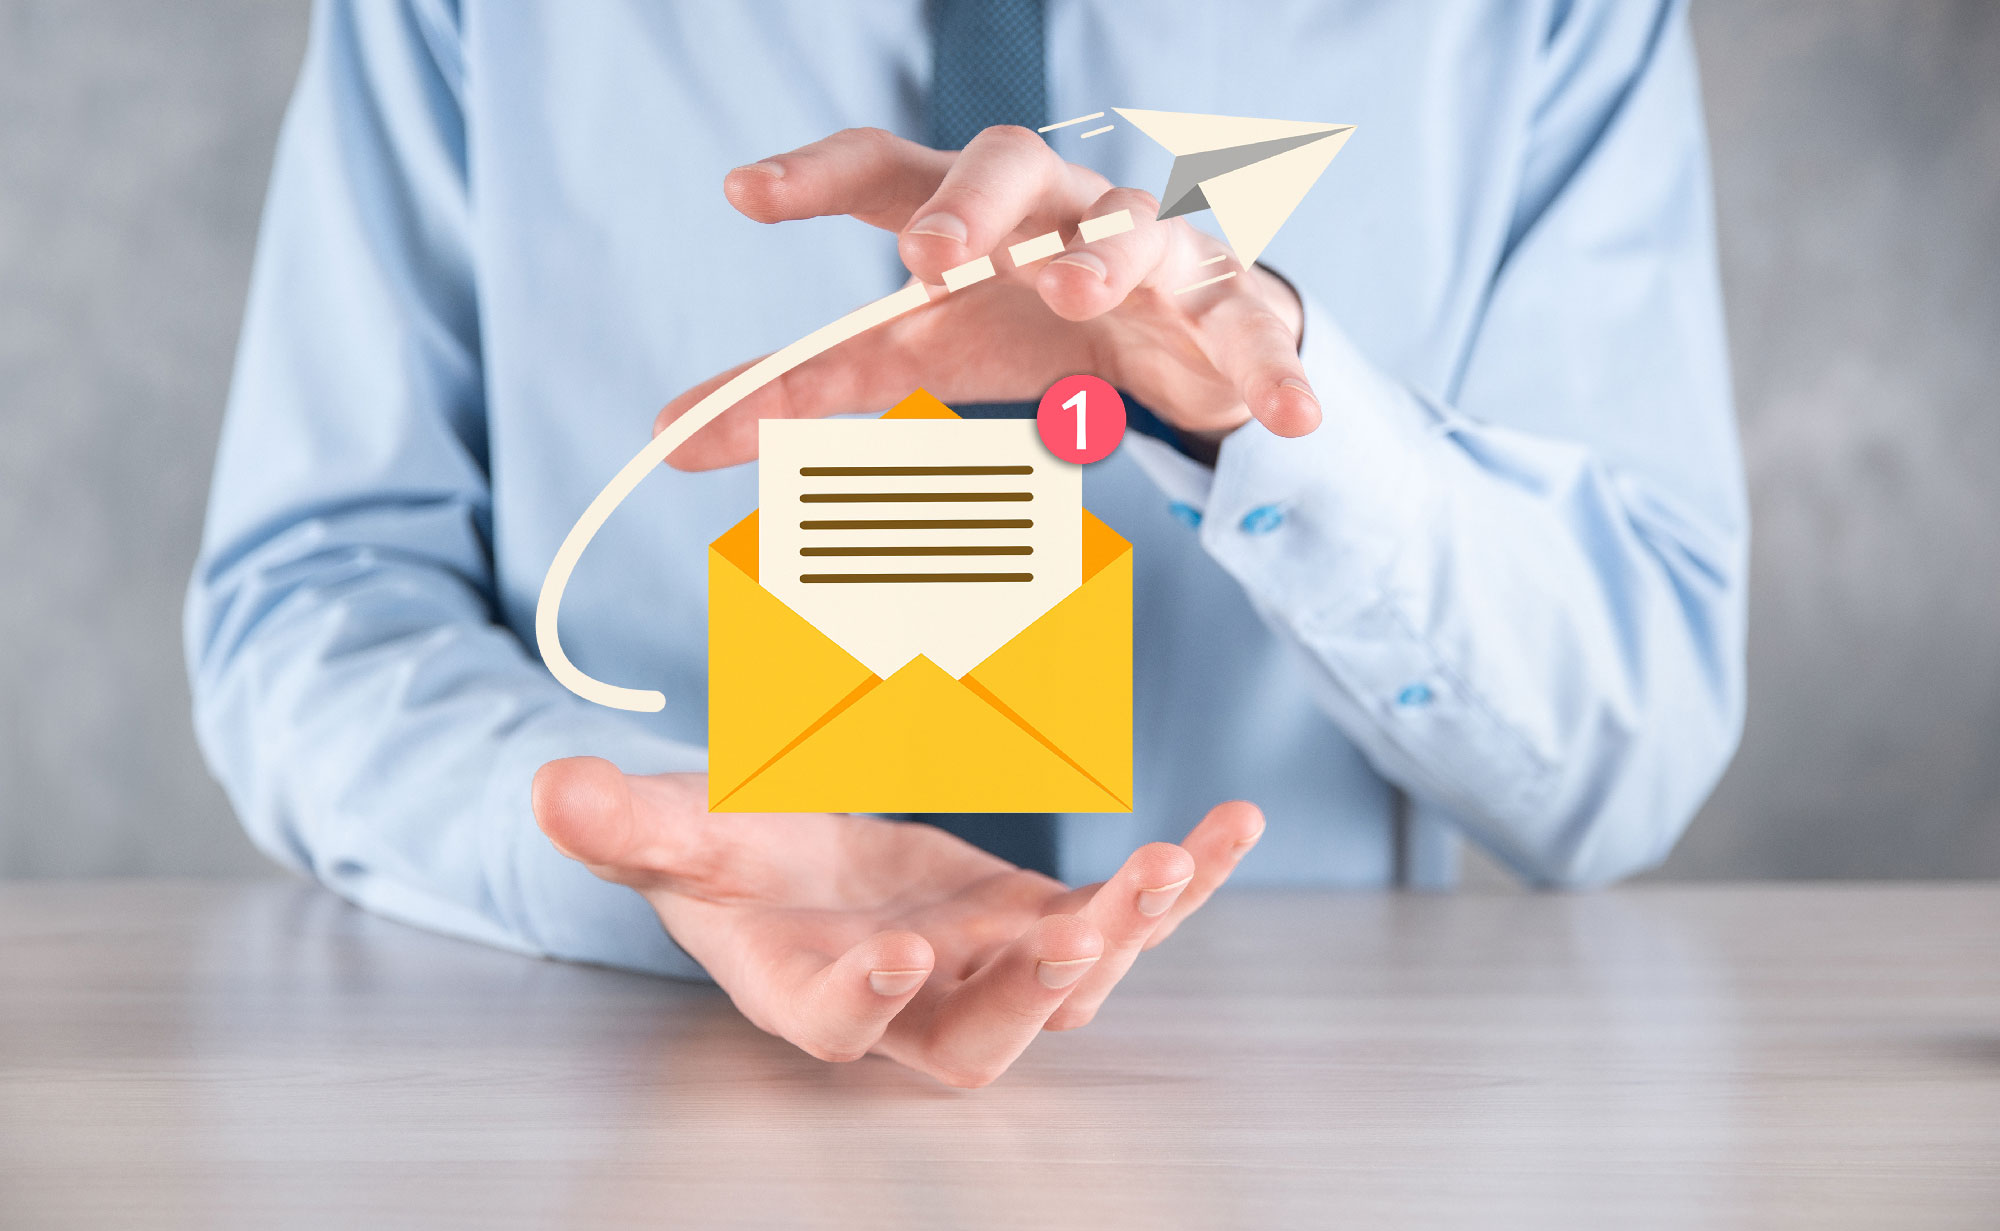 HOW TO TRACK DIRECT MAIL CAMPAIGNS FOR NONPROFITS